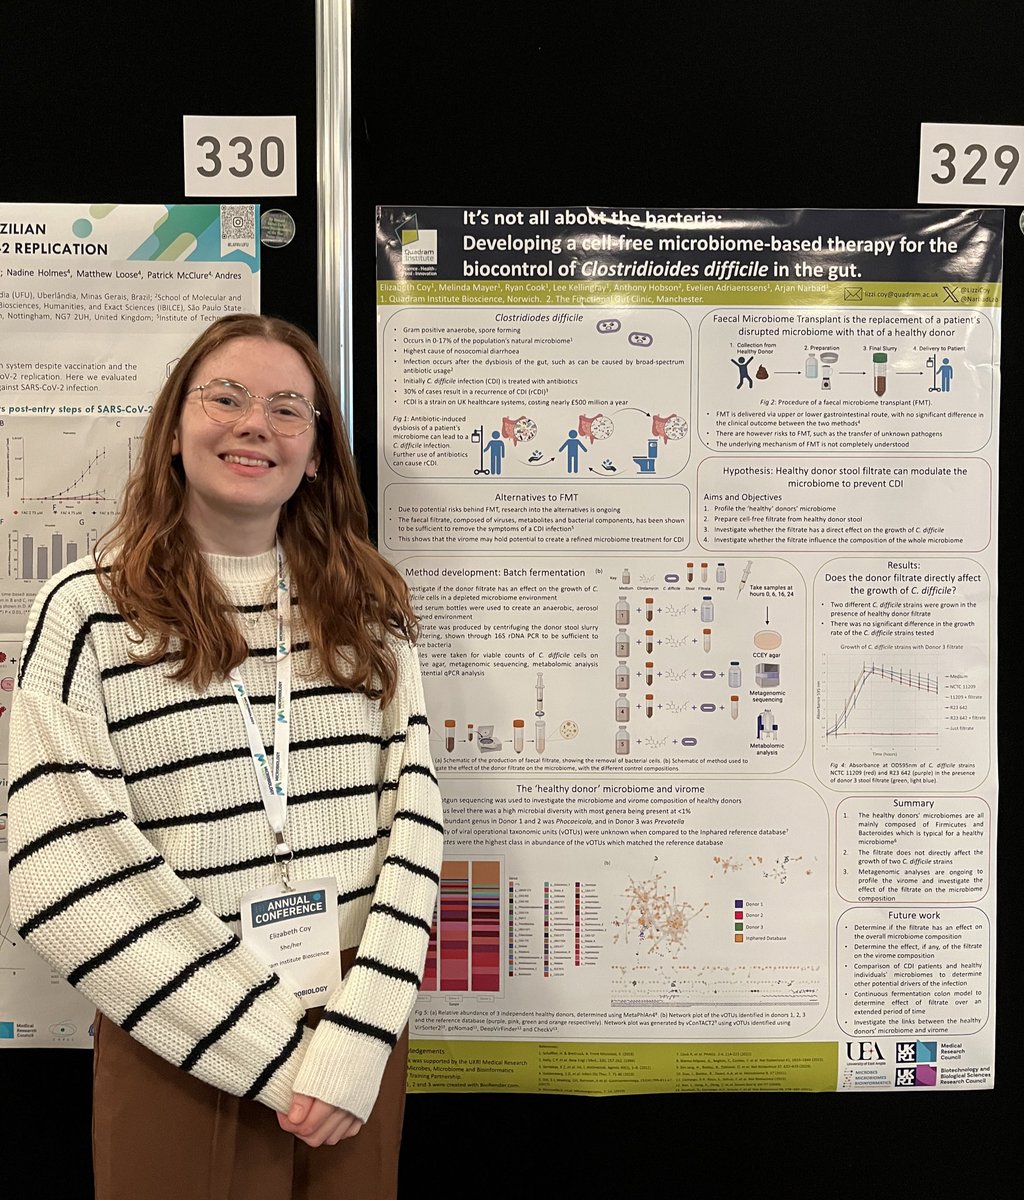 Excited to be presenting my poster today at @MicrobioSoc 2024!! 🏴󠁧󠁢󠁳󠁣󠁴󠁿
Come along to poster A329 to find out more about using our microbiome to treat CDI 🧫👩‍🔬

#PhDlife #microbiome #Microbio24 #womeninSTEM